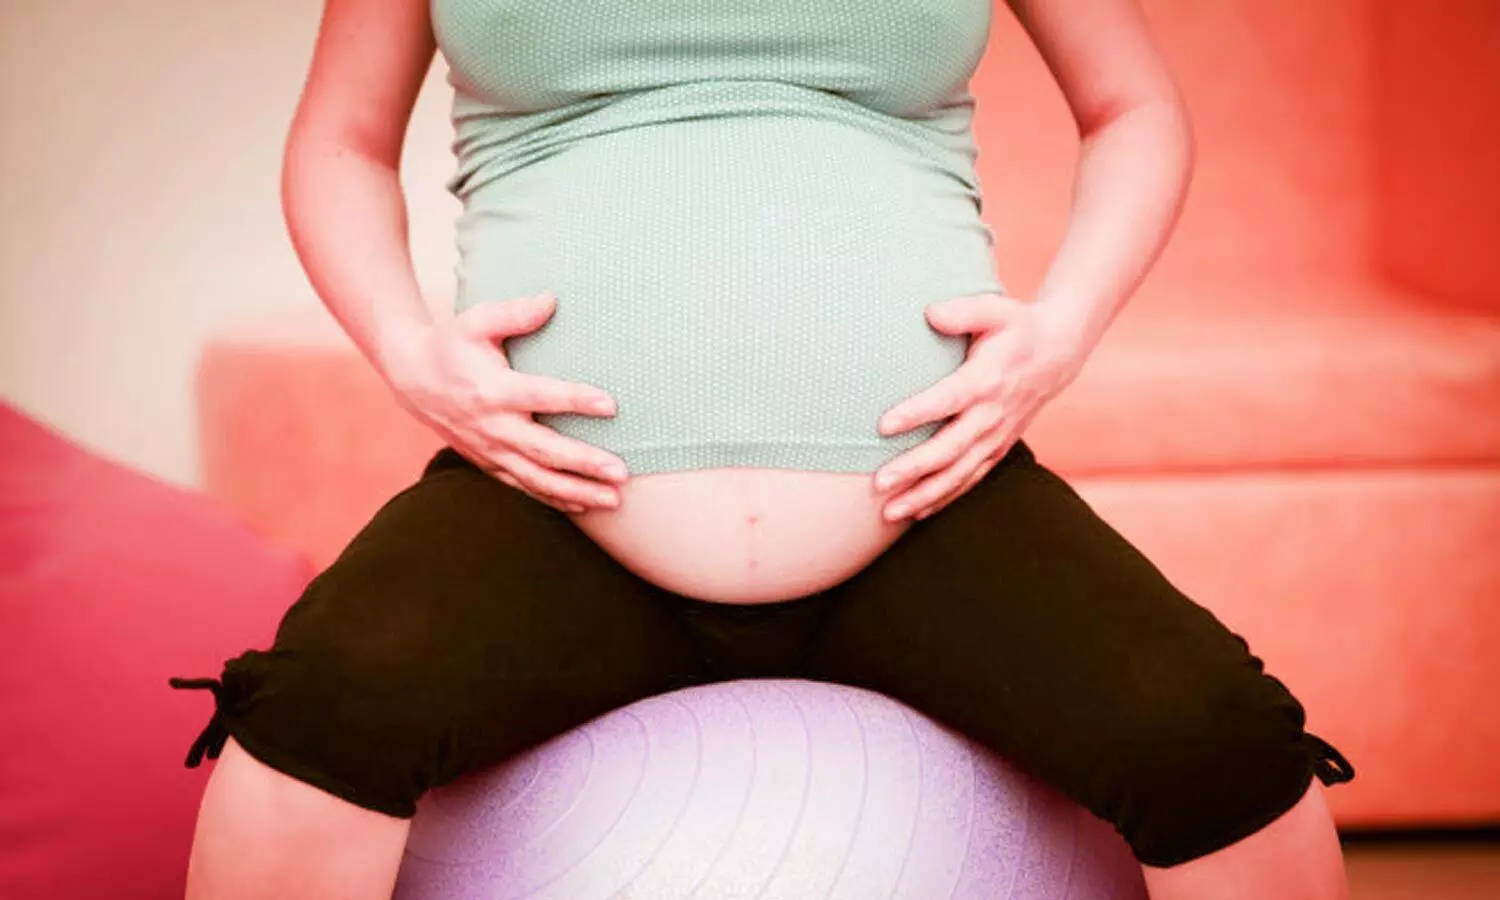 Higher levels of exercise linked to very early pregnancy loss